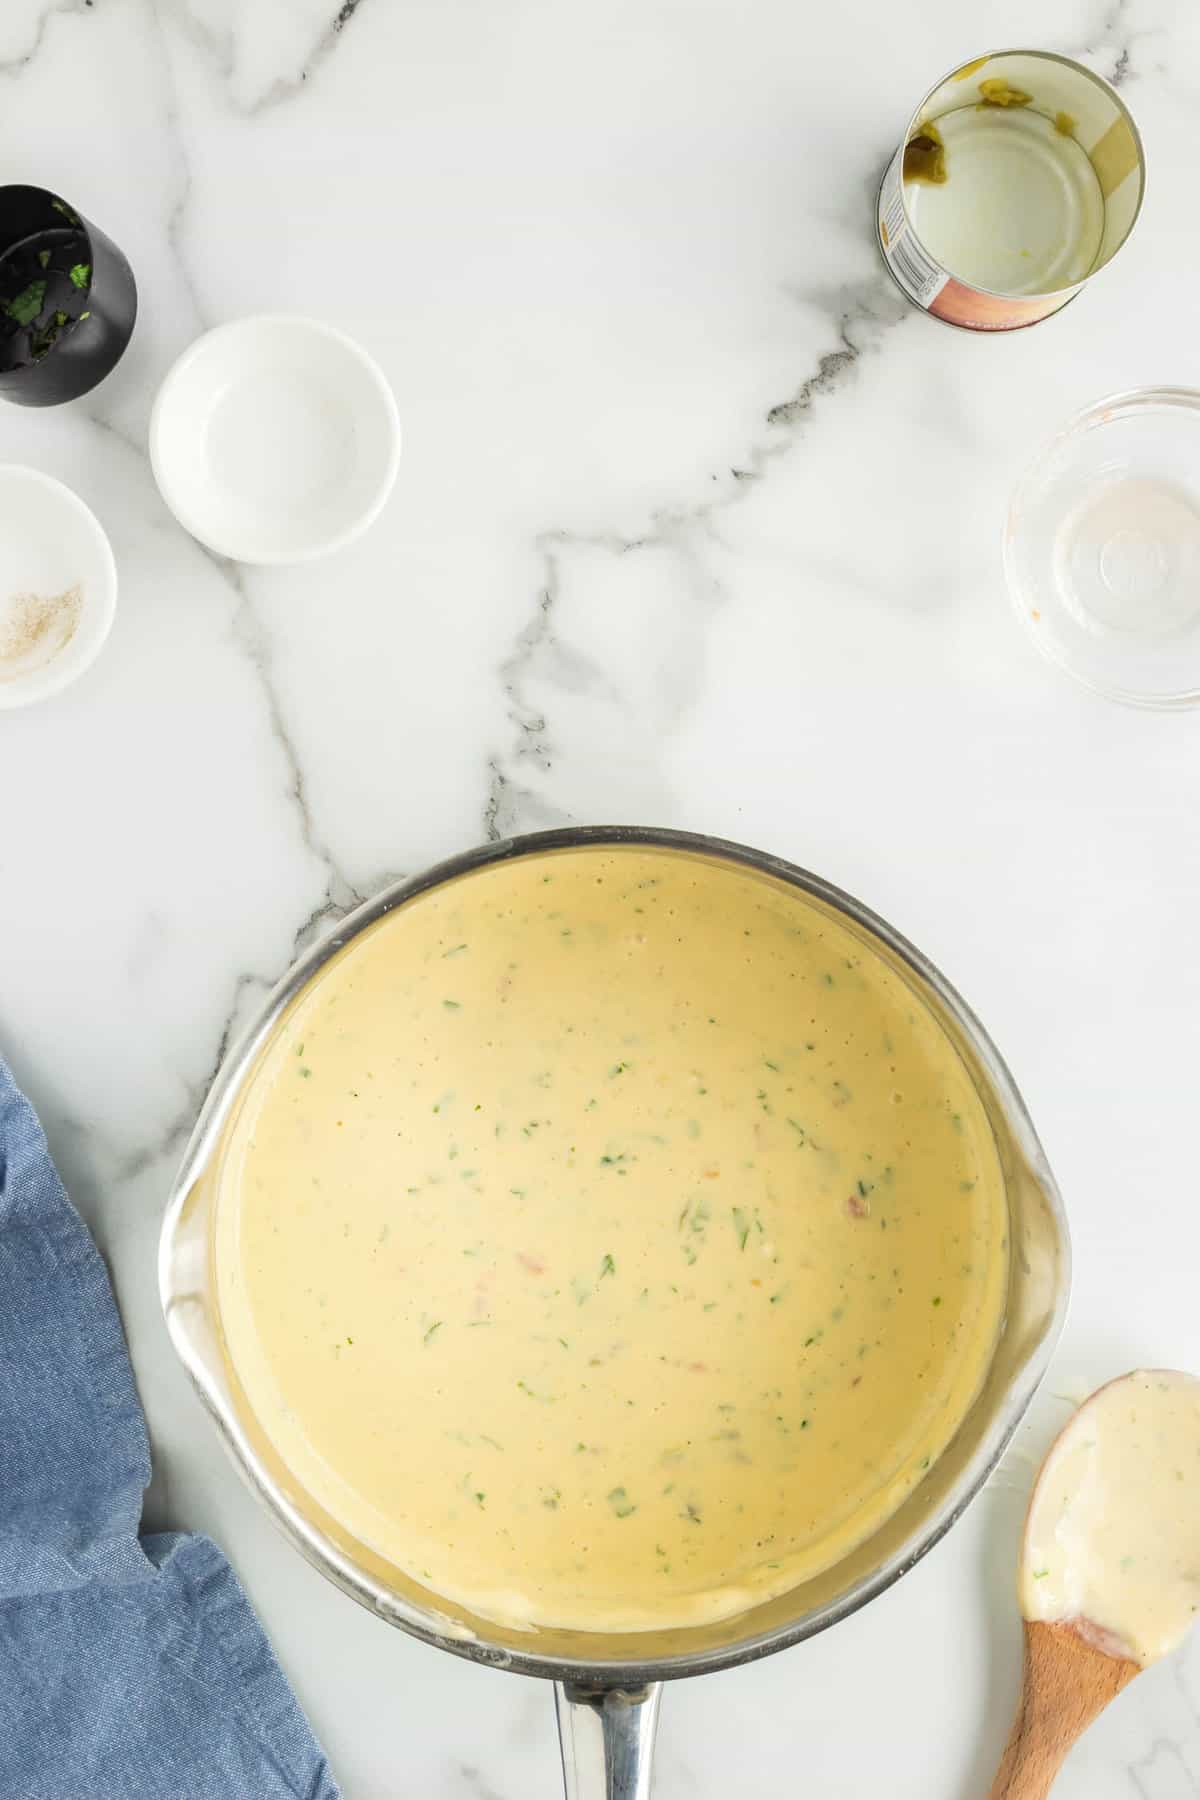 Perfectly Blended Homemade Queso Dip in Saucepan